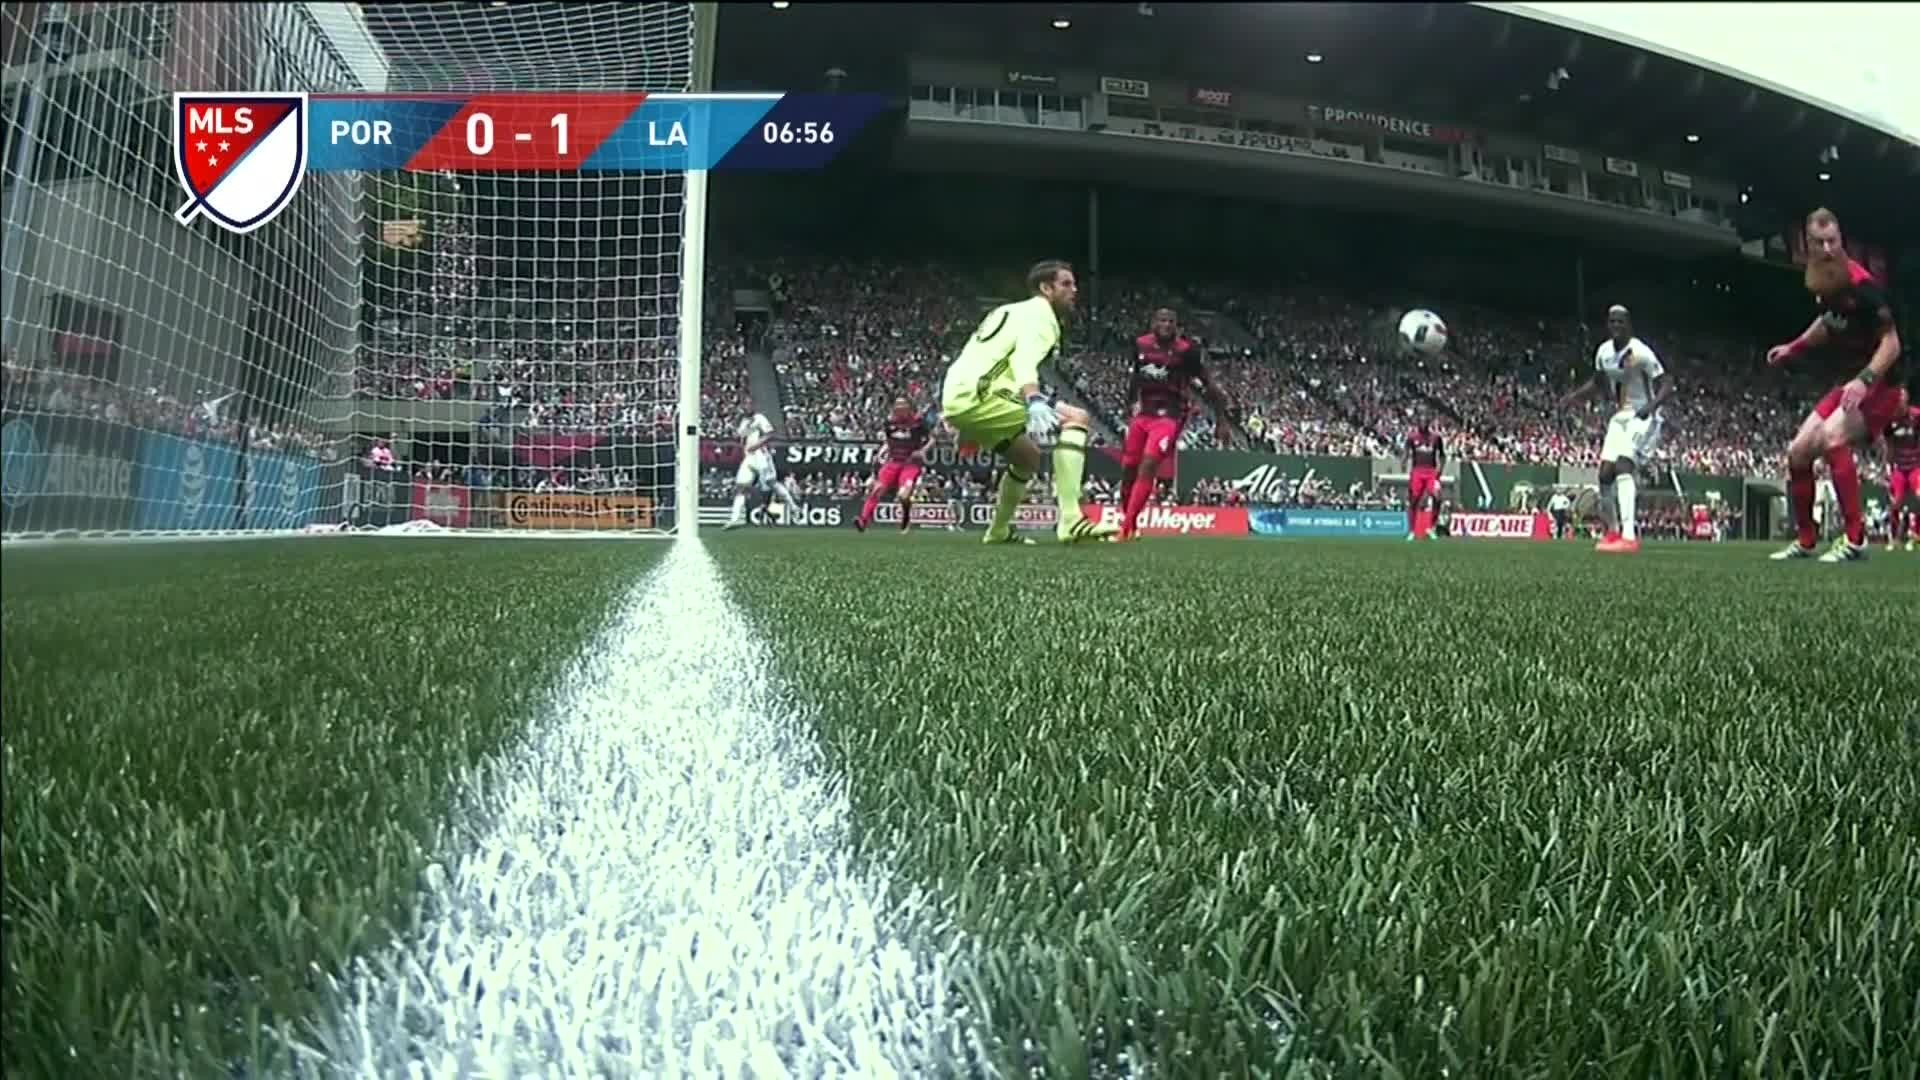 1920x1080 Highlights from the MLS game between Portland Timbers and LA Galaxy